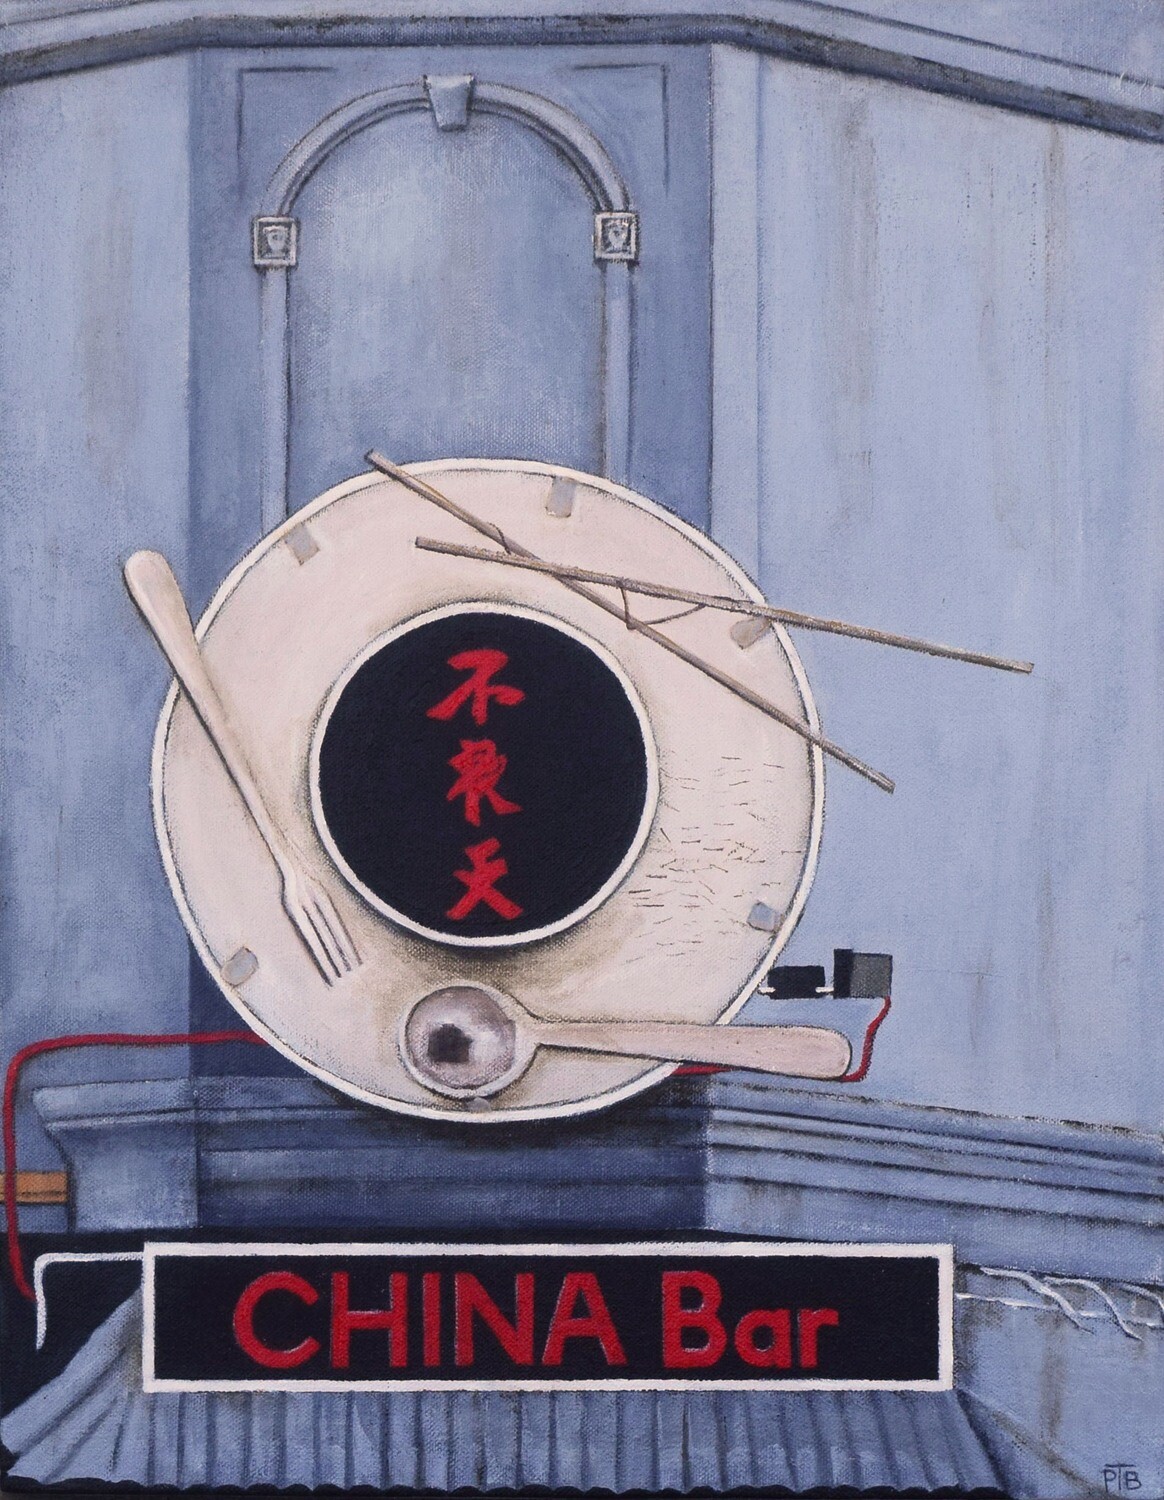 Original painting - China Bar *On display at Station Gallery Yarragon until 28th April. See item description for pickup/delivery options.